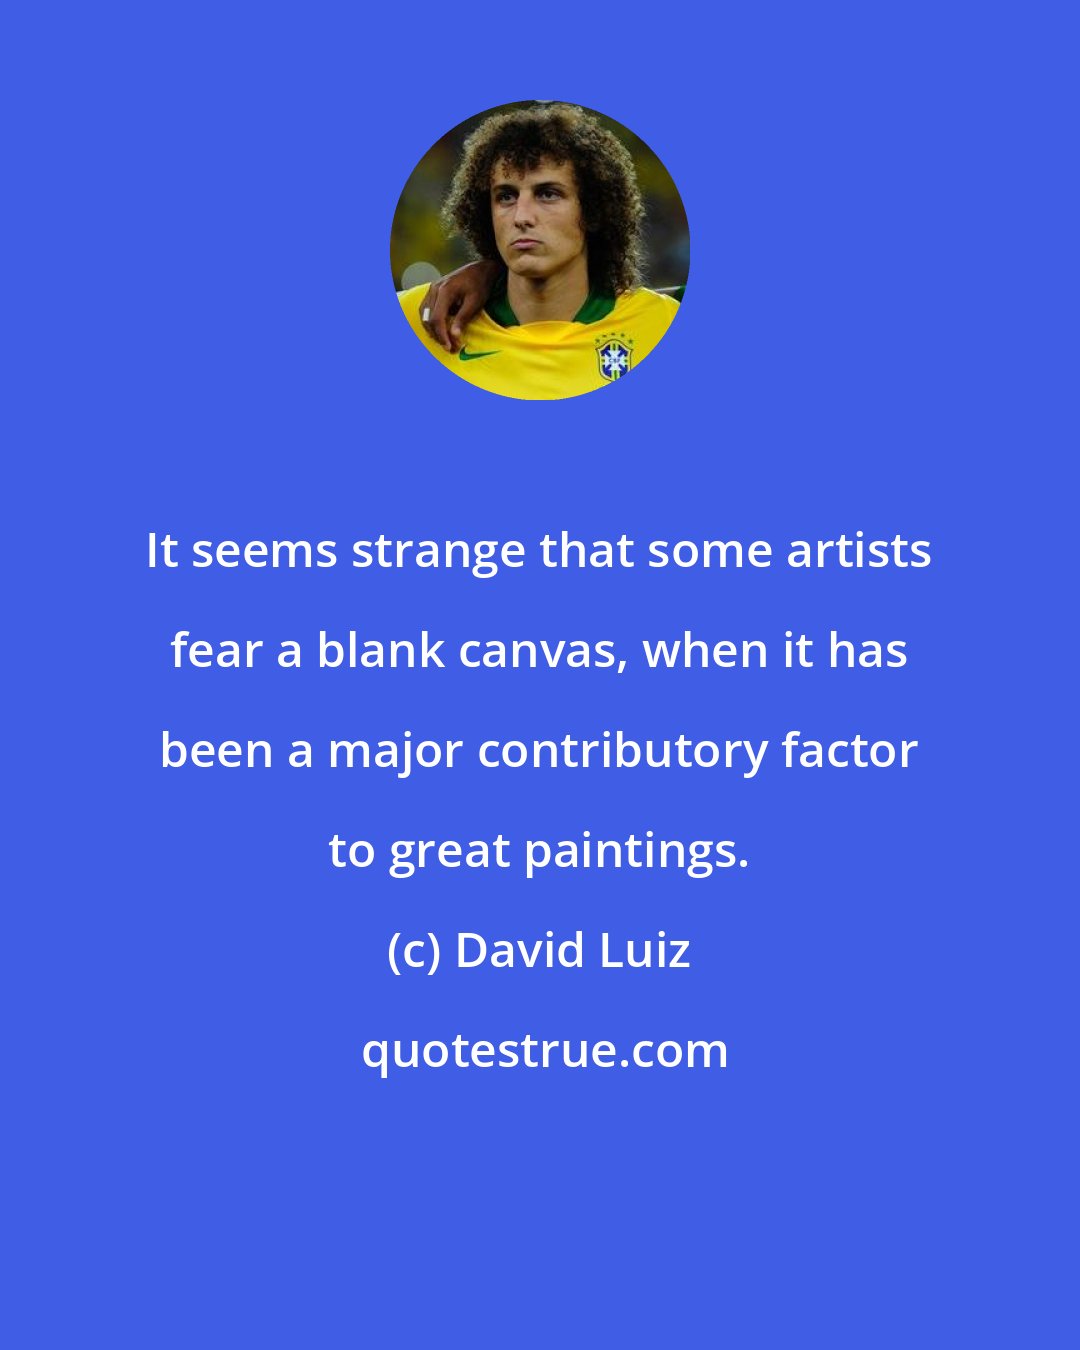 David Luiz: It seems strange that some artists fear a blank canvas, when it has been a major contributory factor to great paintings.